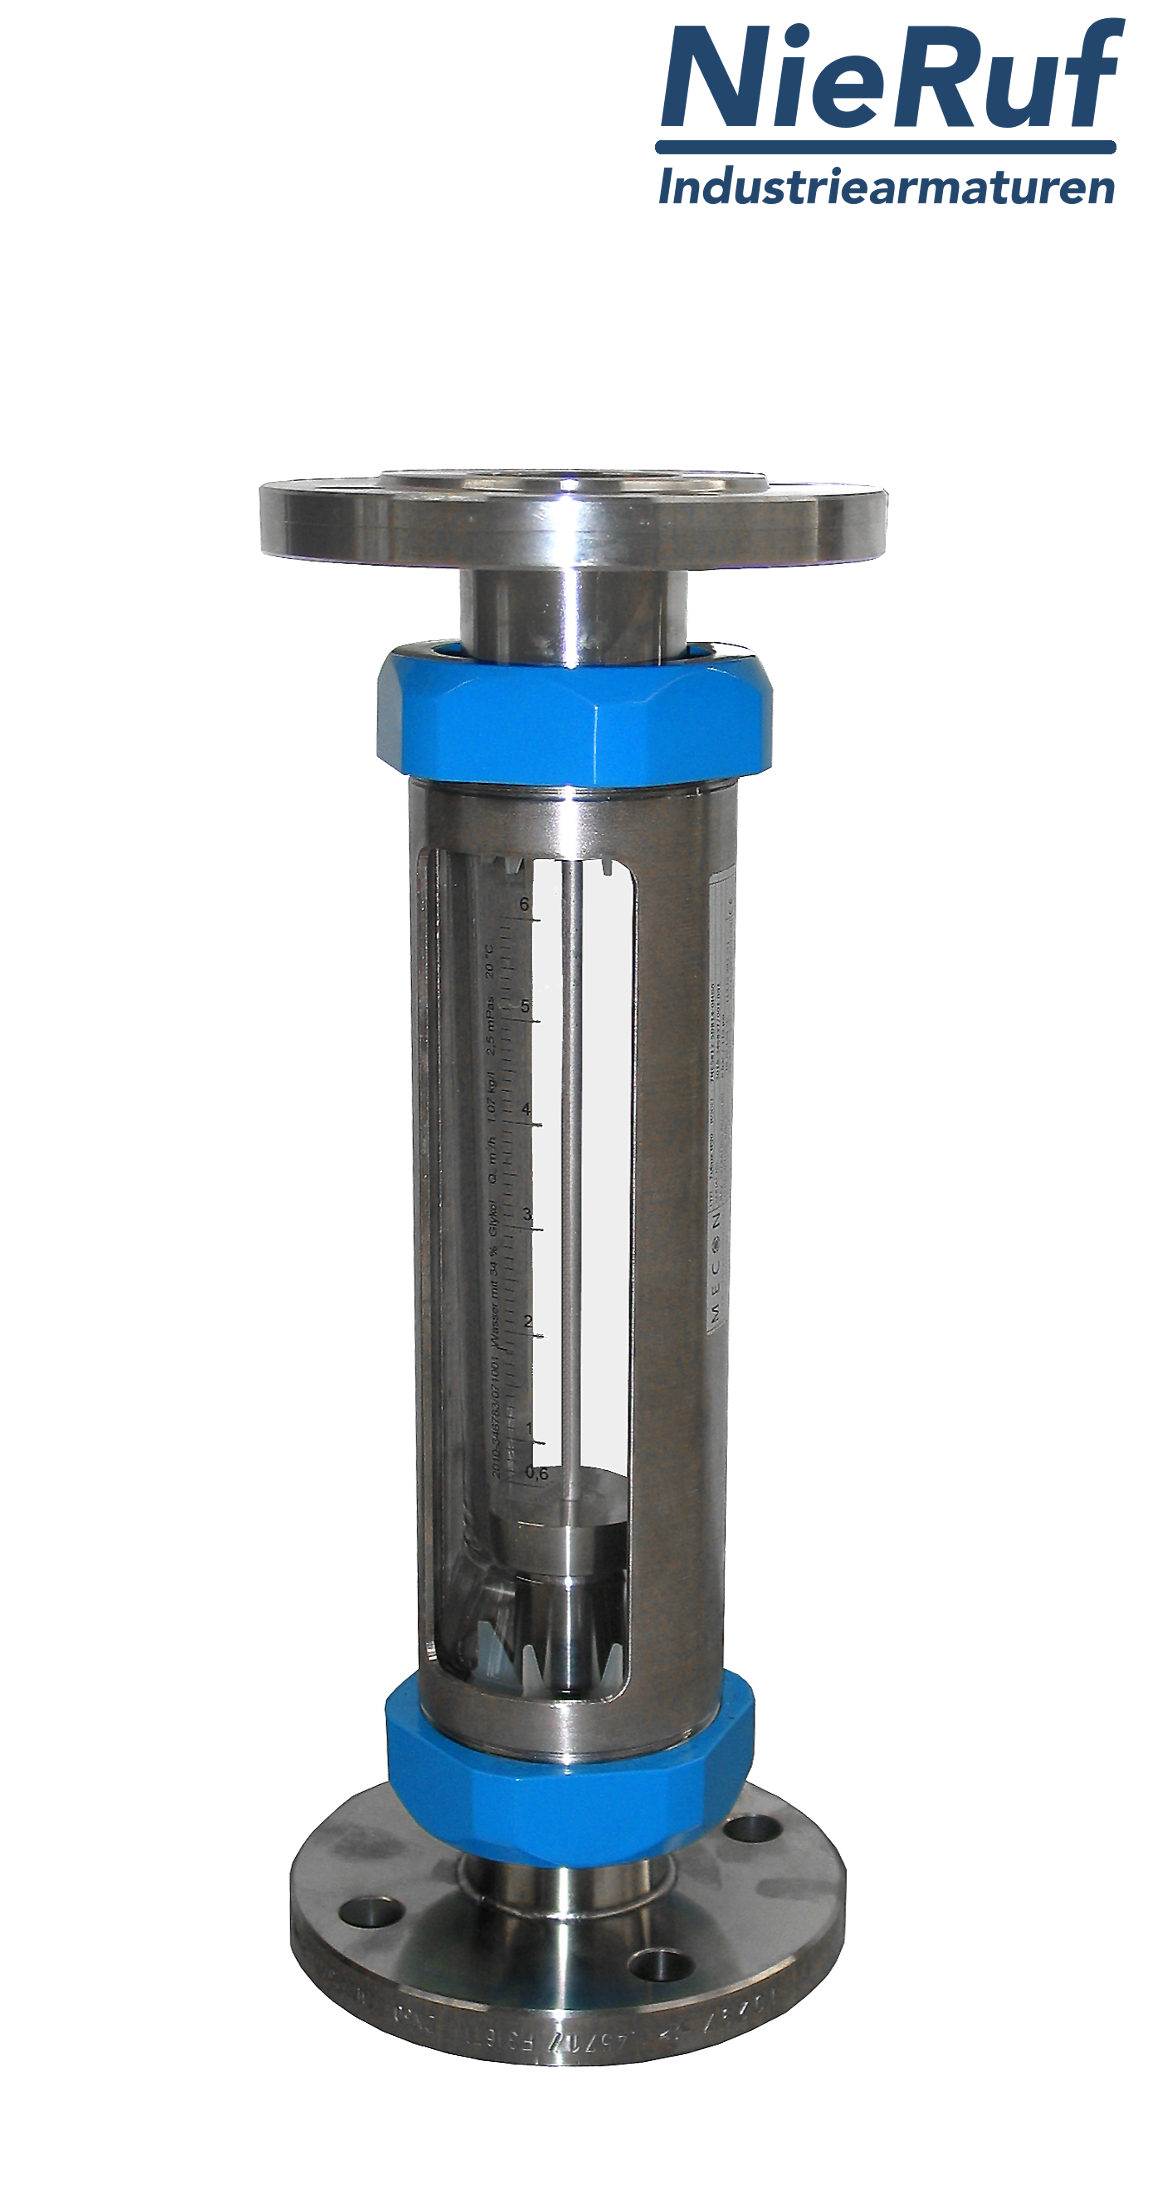 Variable area flowmeter stainless steel + borosilicate flange DN20 0.5 - 5.0 l/h water FKM